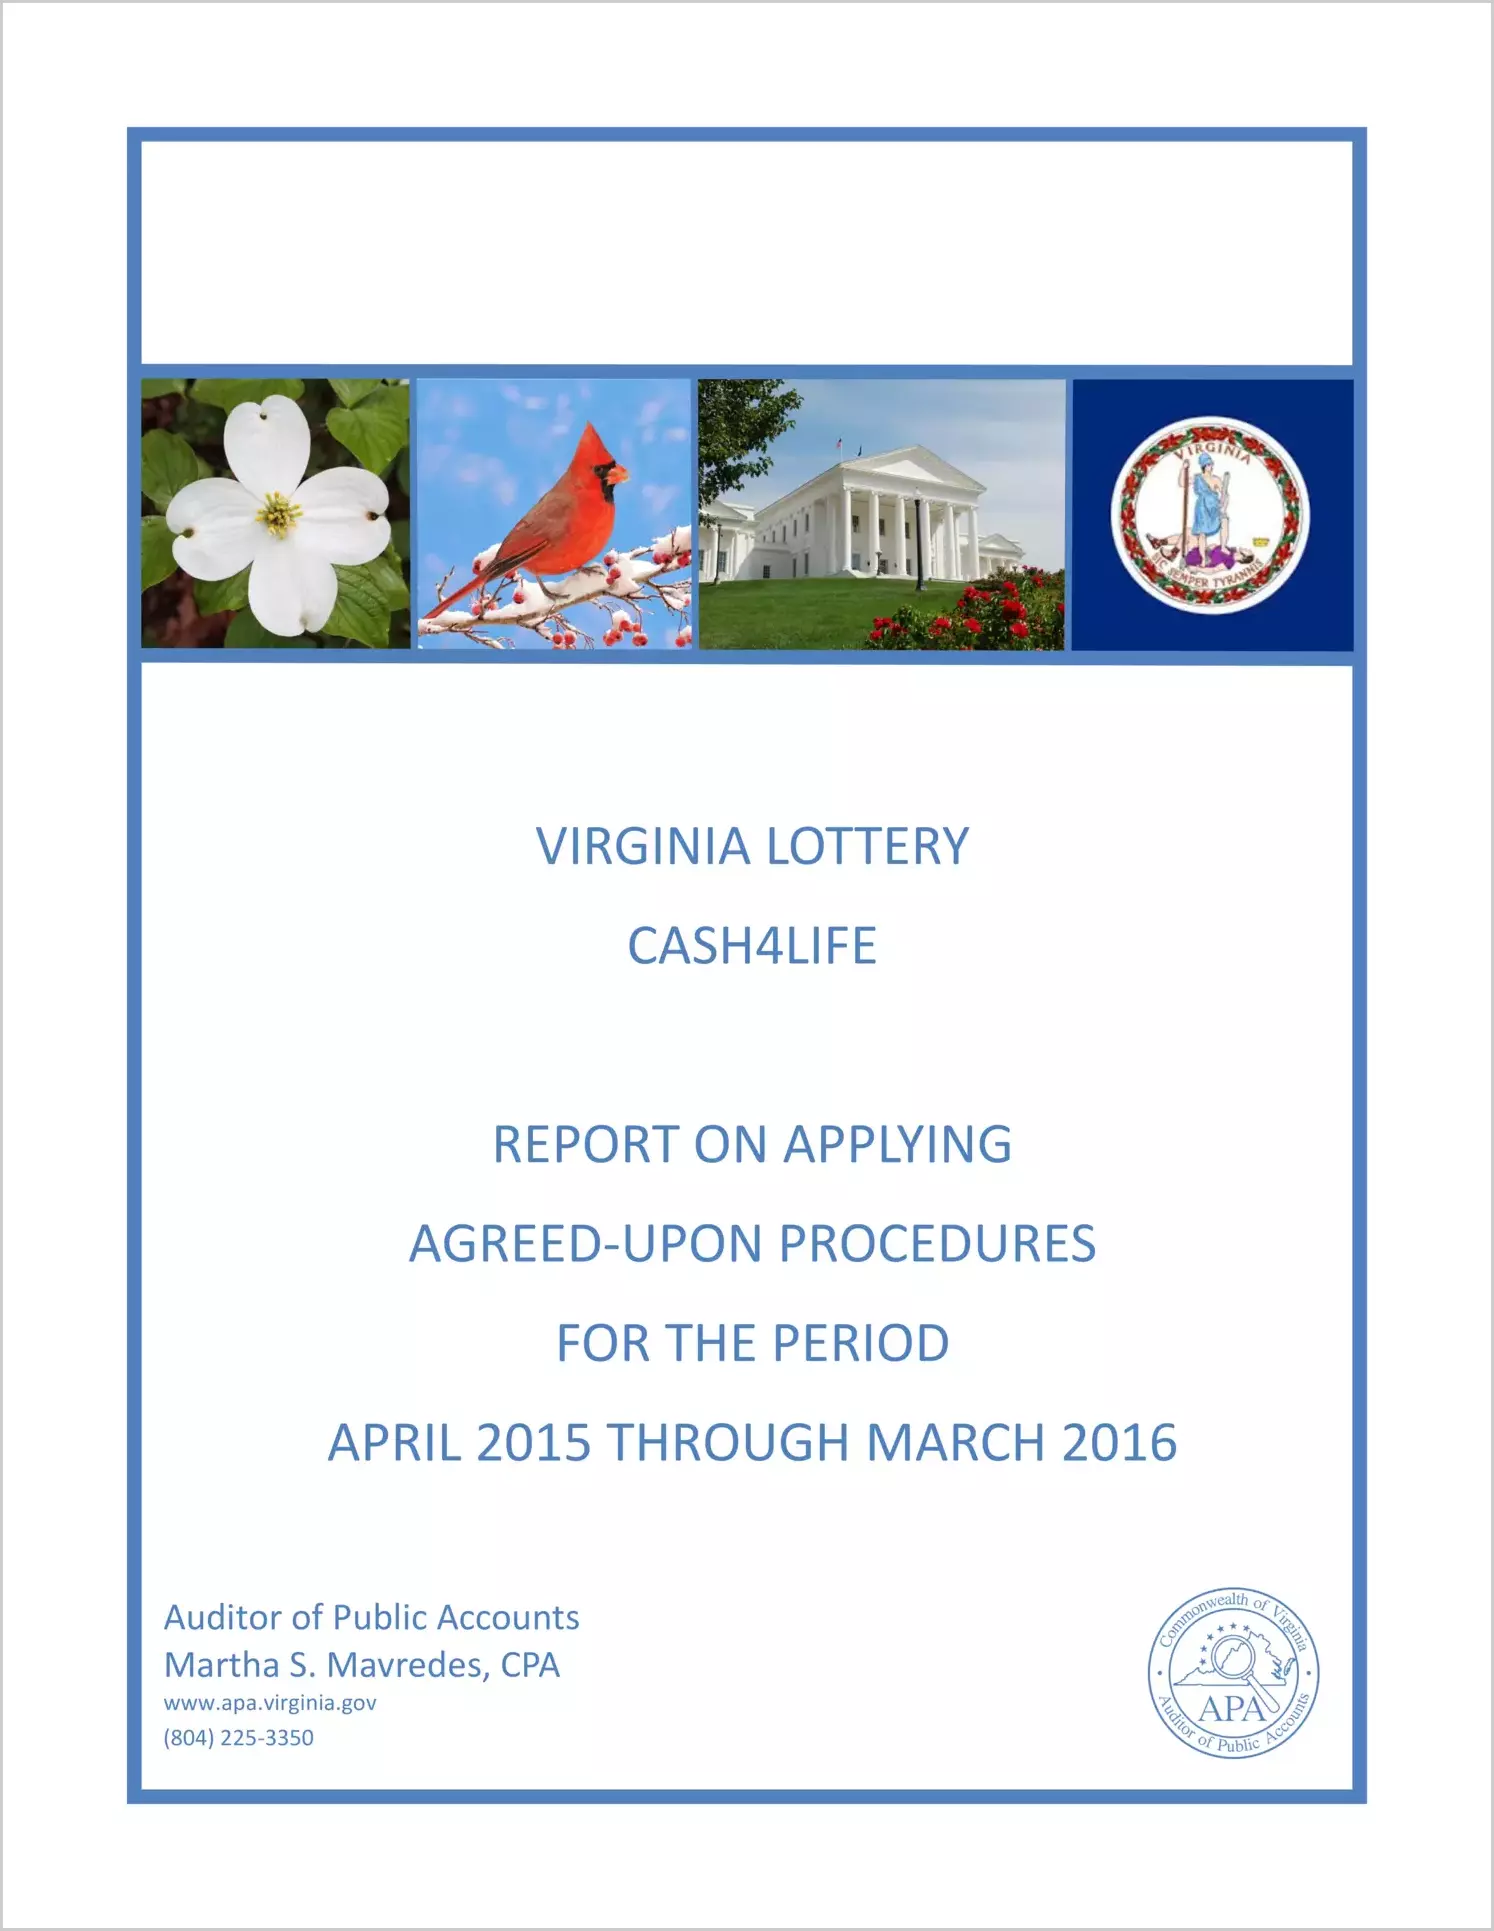 VA Lottery Cash4Life report on Applying Agreed-Upon Procedures for the period April, 2015 through March, 2016